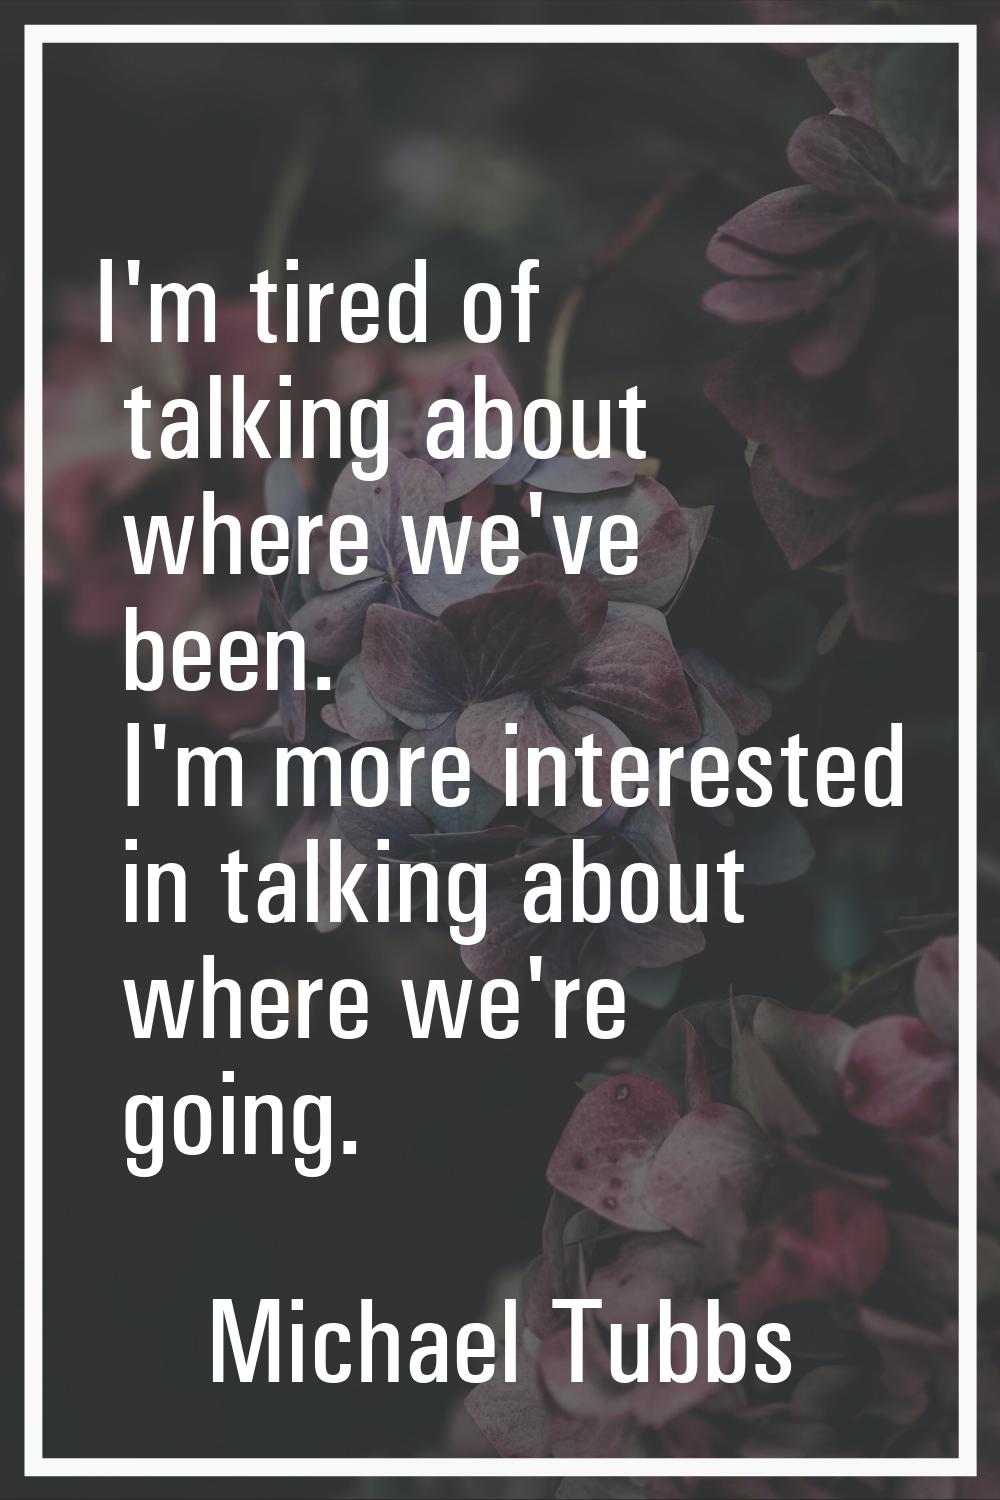 I'm tired of talking about where we've been. I'm more interested in talking about where we're going